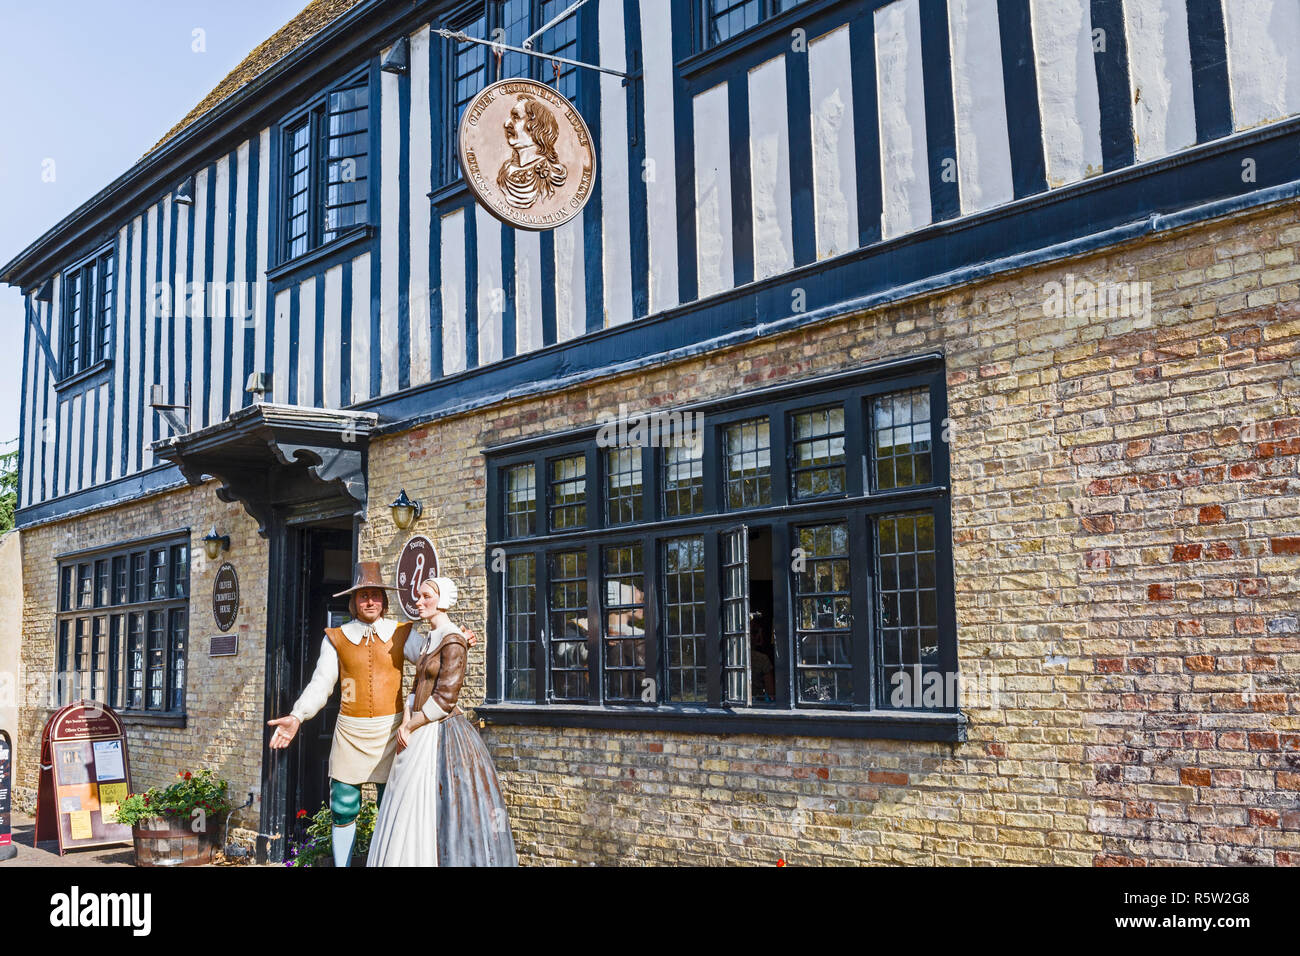 Ely (Cambridgeshire, UK): The house of Oliver Cromwell, now a museum Stock Photo